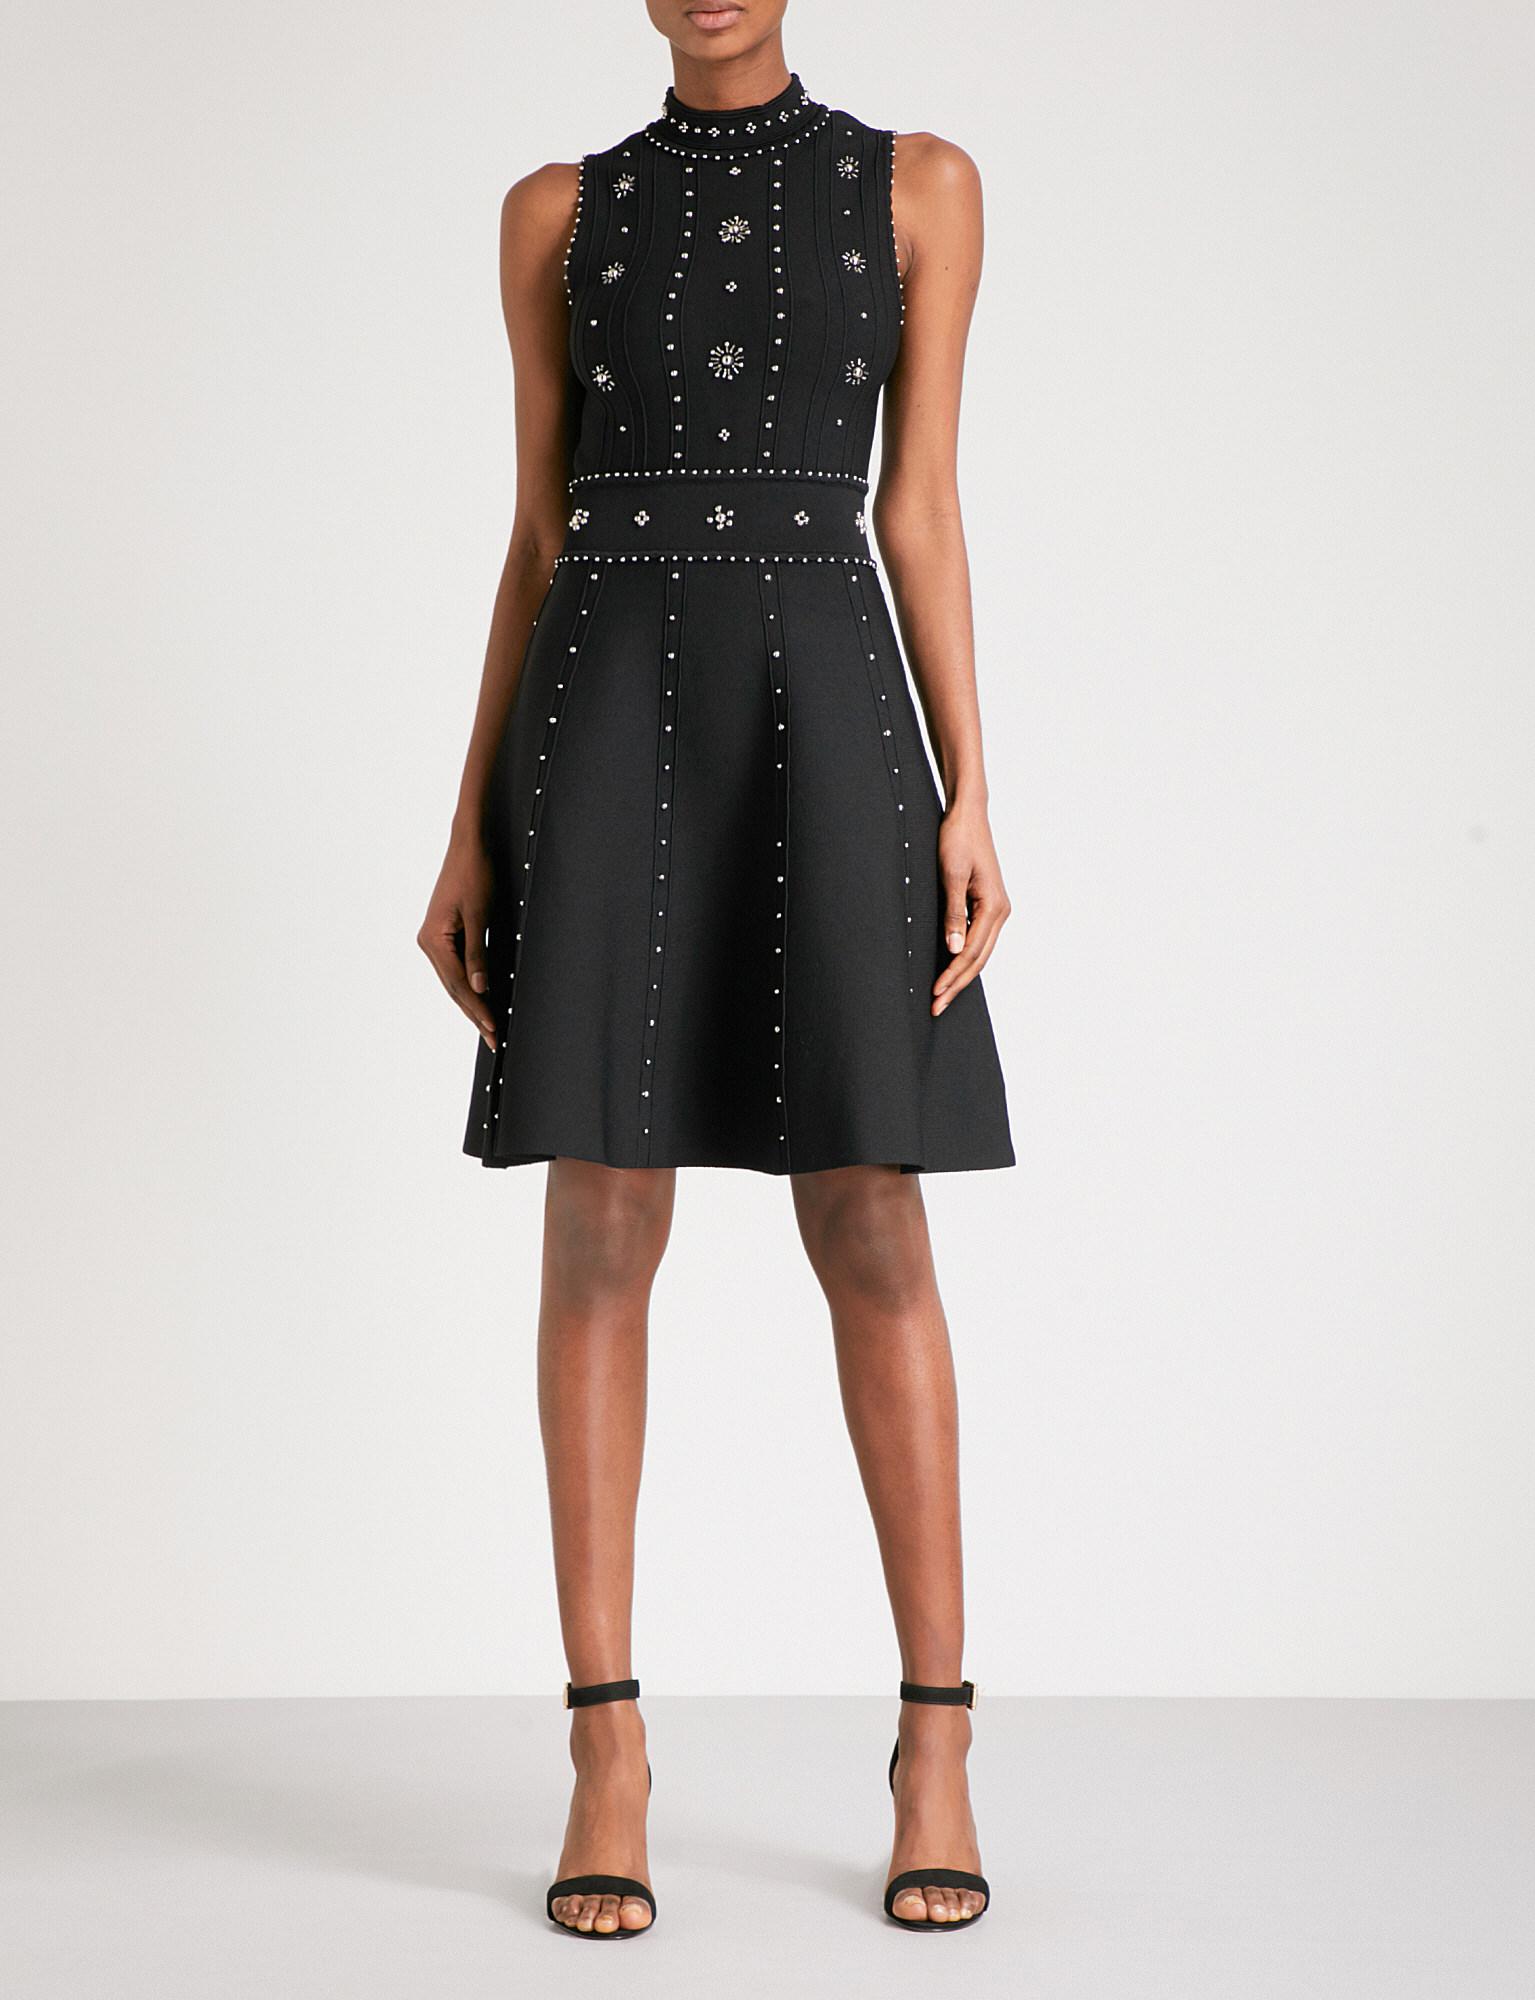 Sandro Embellished Knitted Dress in Black | Lyst